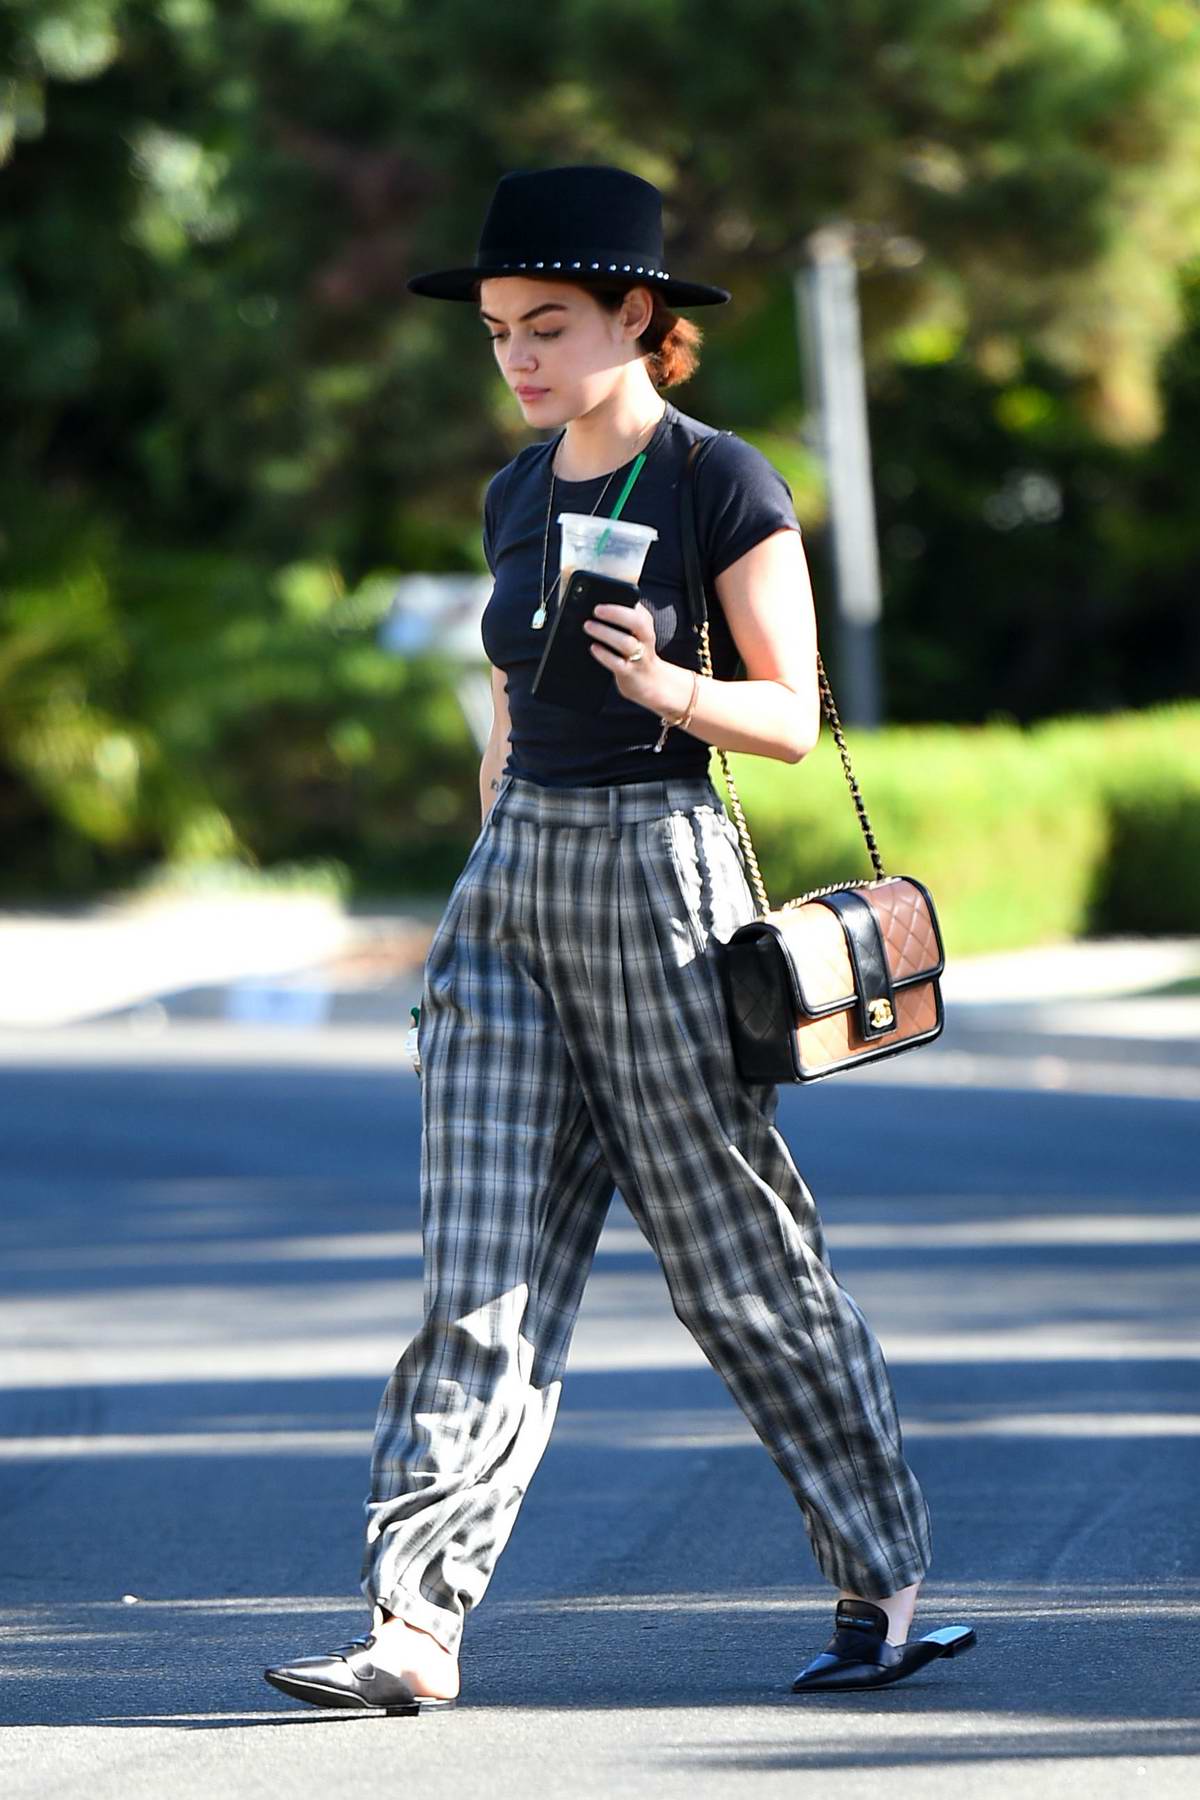 Clare V. Grande Fanny Pack worn by Lucy Hale in Los Angeles on